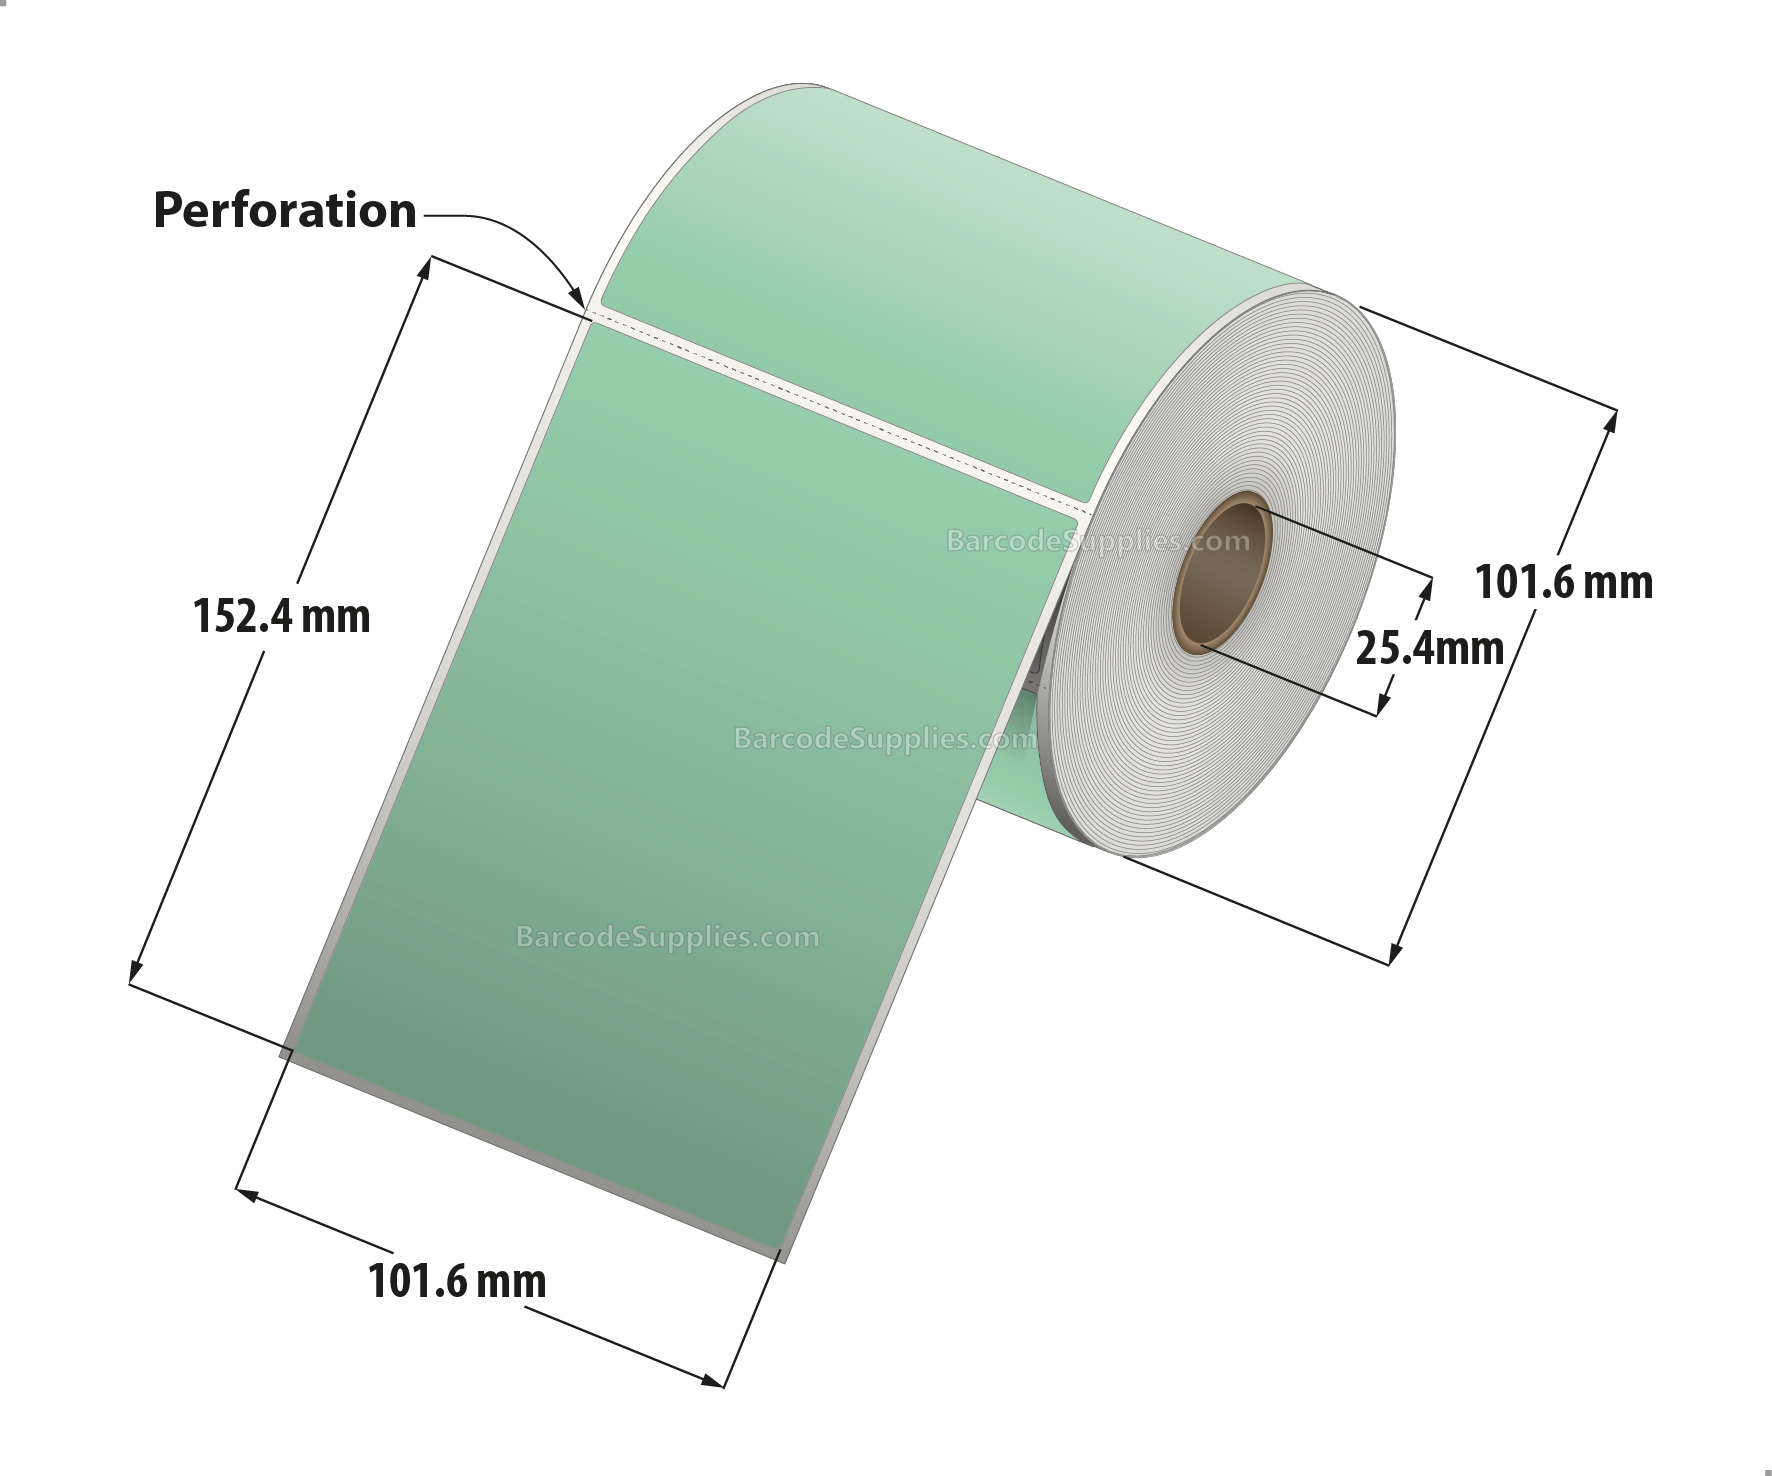 4 x 6 Direct Thermal Green Labels With Acrylic Adhesive - Perforated - 250 Labels Per Roll - Carton Of 12 Rolls - 3000 Labels Total - MPN: RD-4-6-250-GR